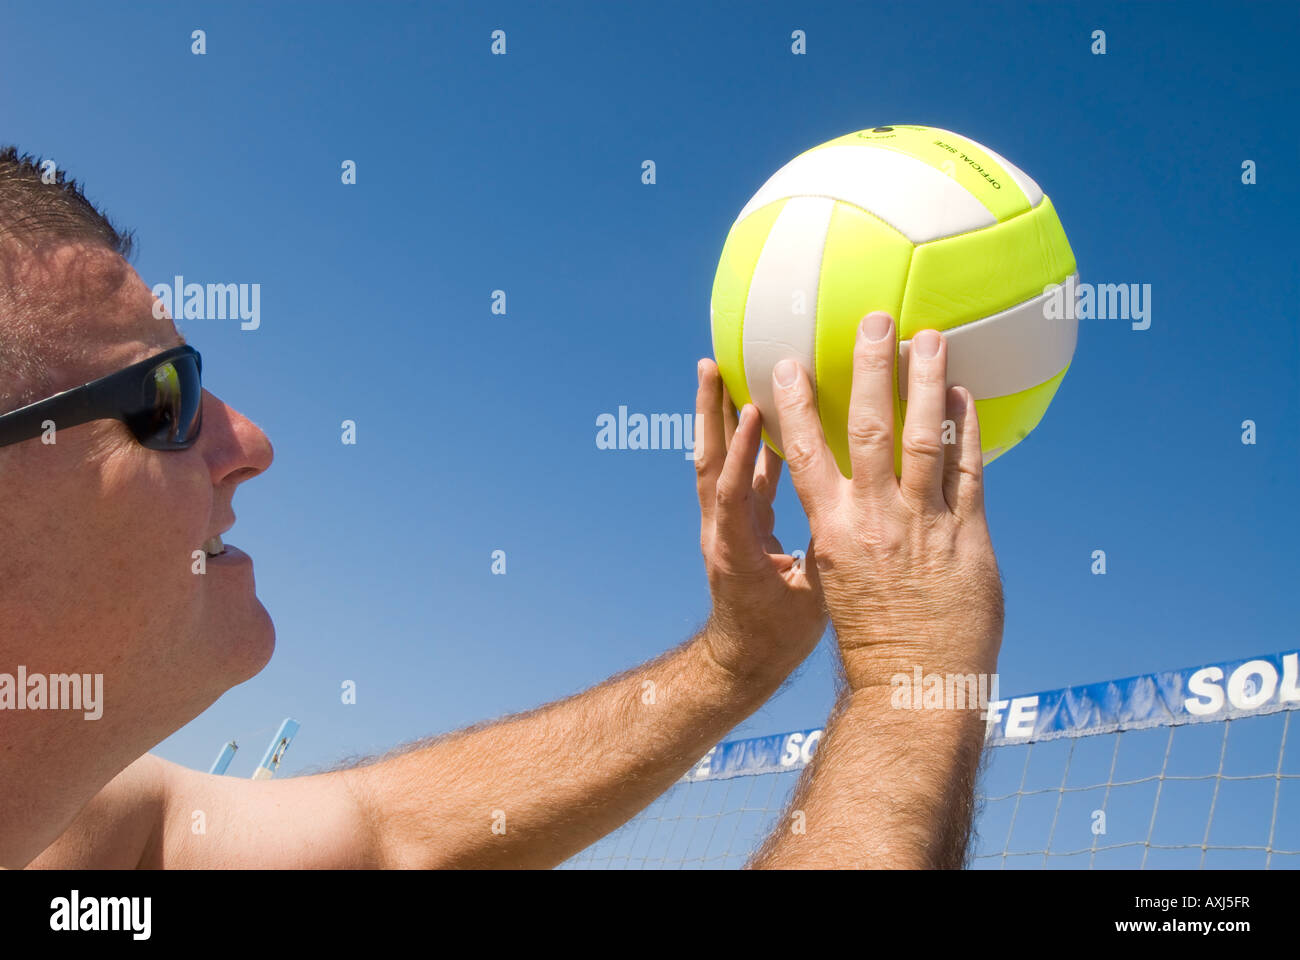 A volleyball player lobs a ball during a game at the beach Stock Photo